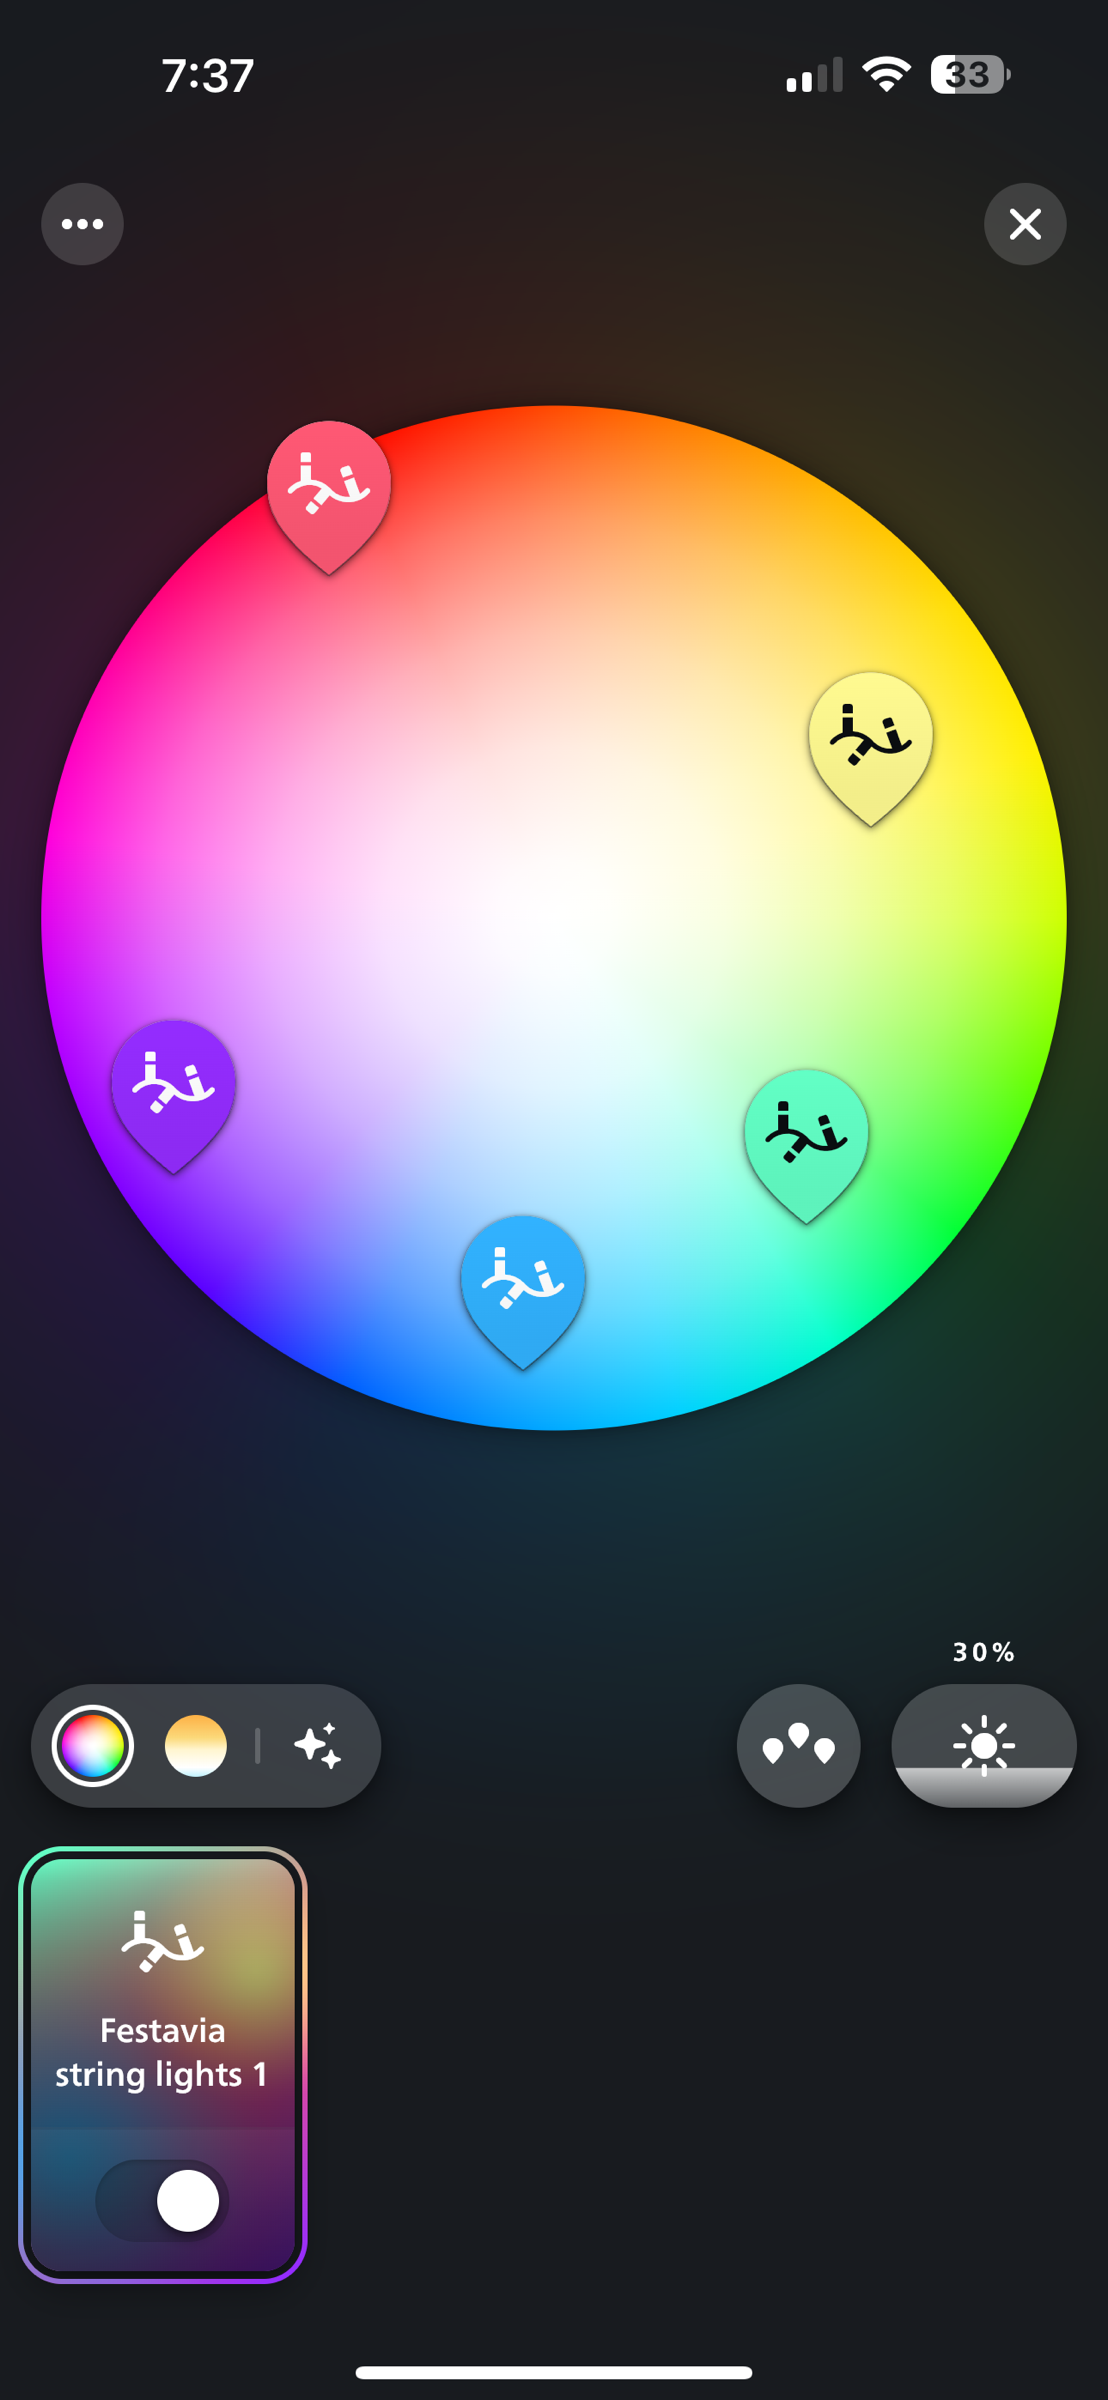 Hue colors showing a color wheel with 5 strings of lights icons sprinkled about it